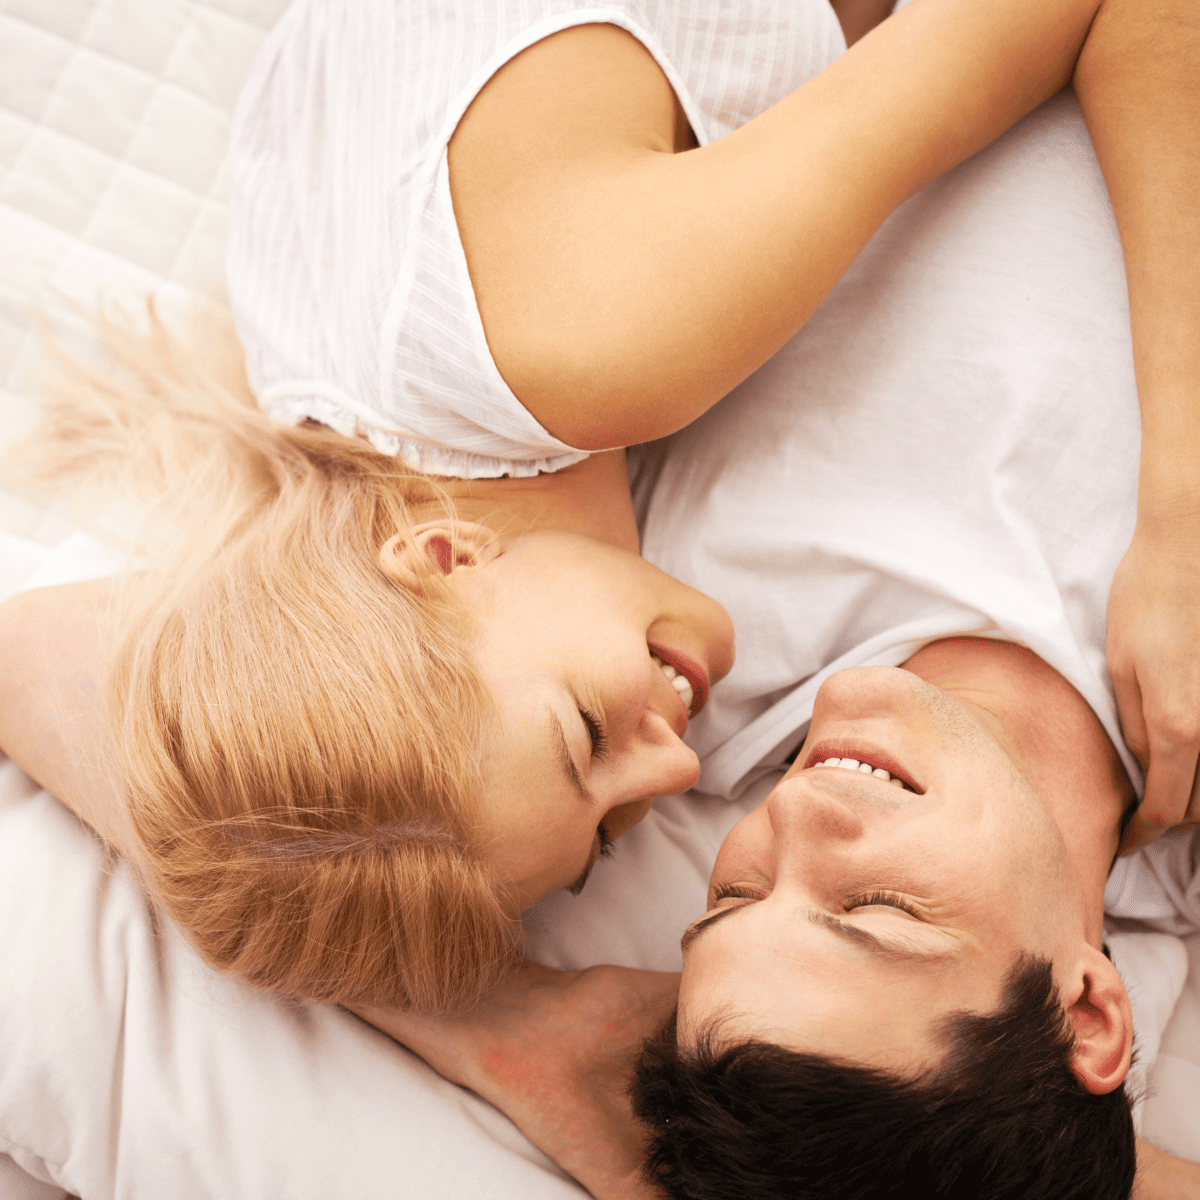 100+ Dirty Questions to Ask Your Boyfriend That Will Turn Him On